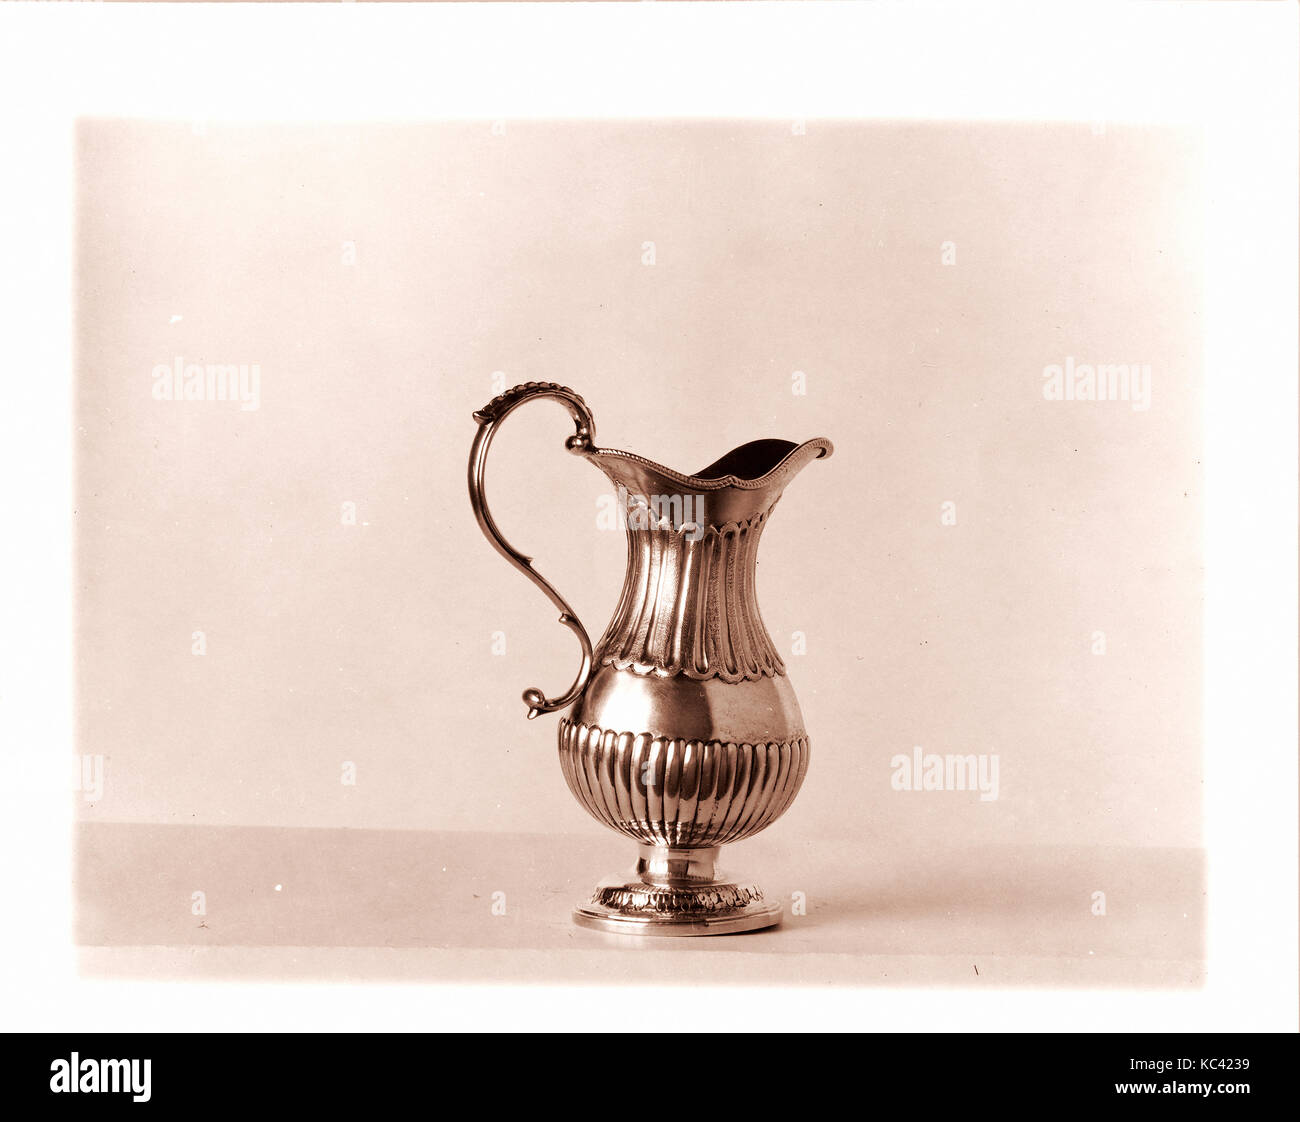 Creamer, ca. 1850, Made in Baltimore, Maryland, United States, American, Silver, Overall: 6 7/8 x 5 3/16 in. (17.5 x 13.2 cm); 1 Stock Photo